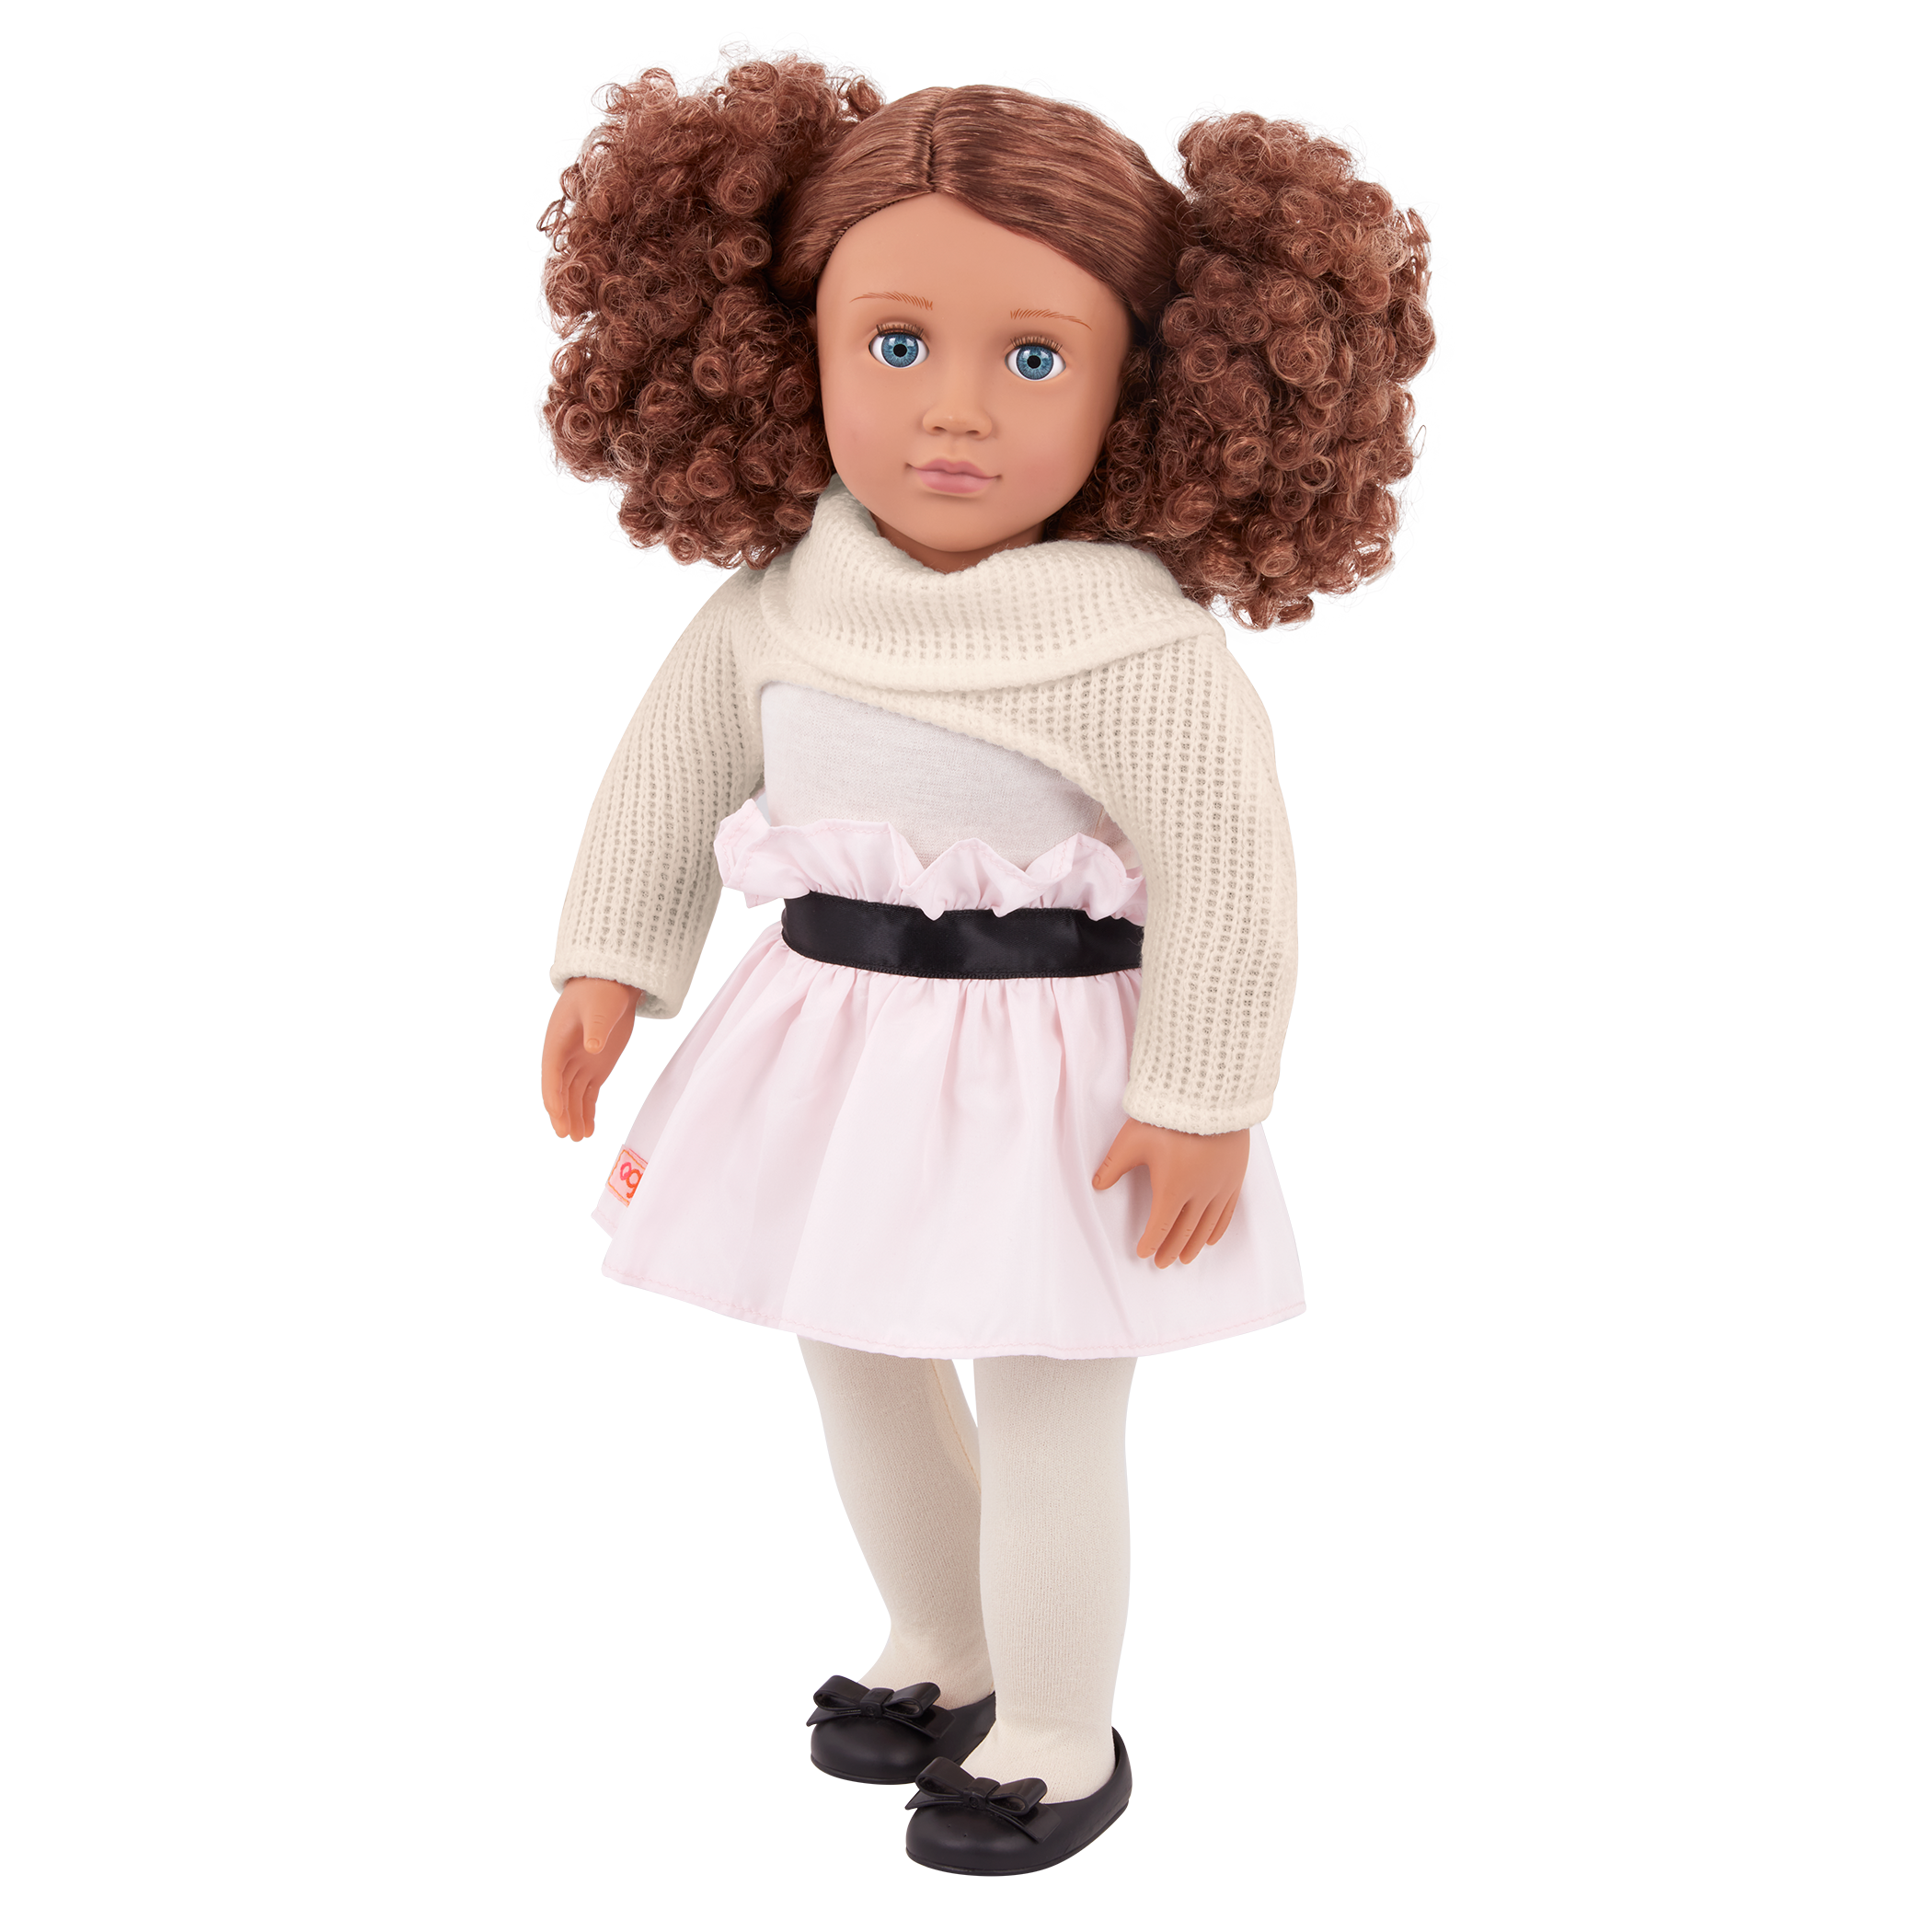 Kaylee | 18-inch Doll with Curly Hair | Our Generation